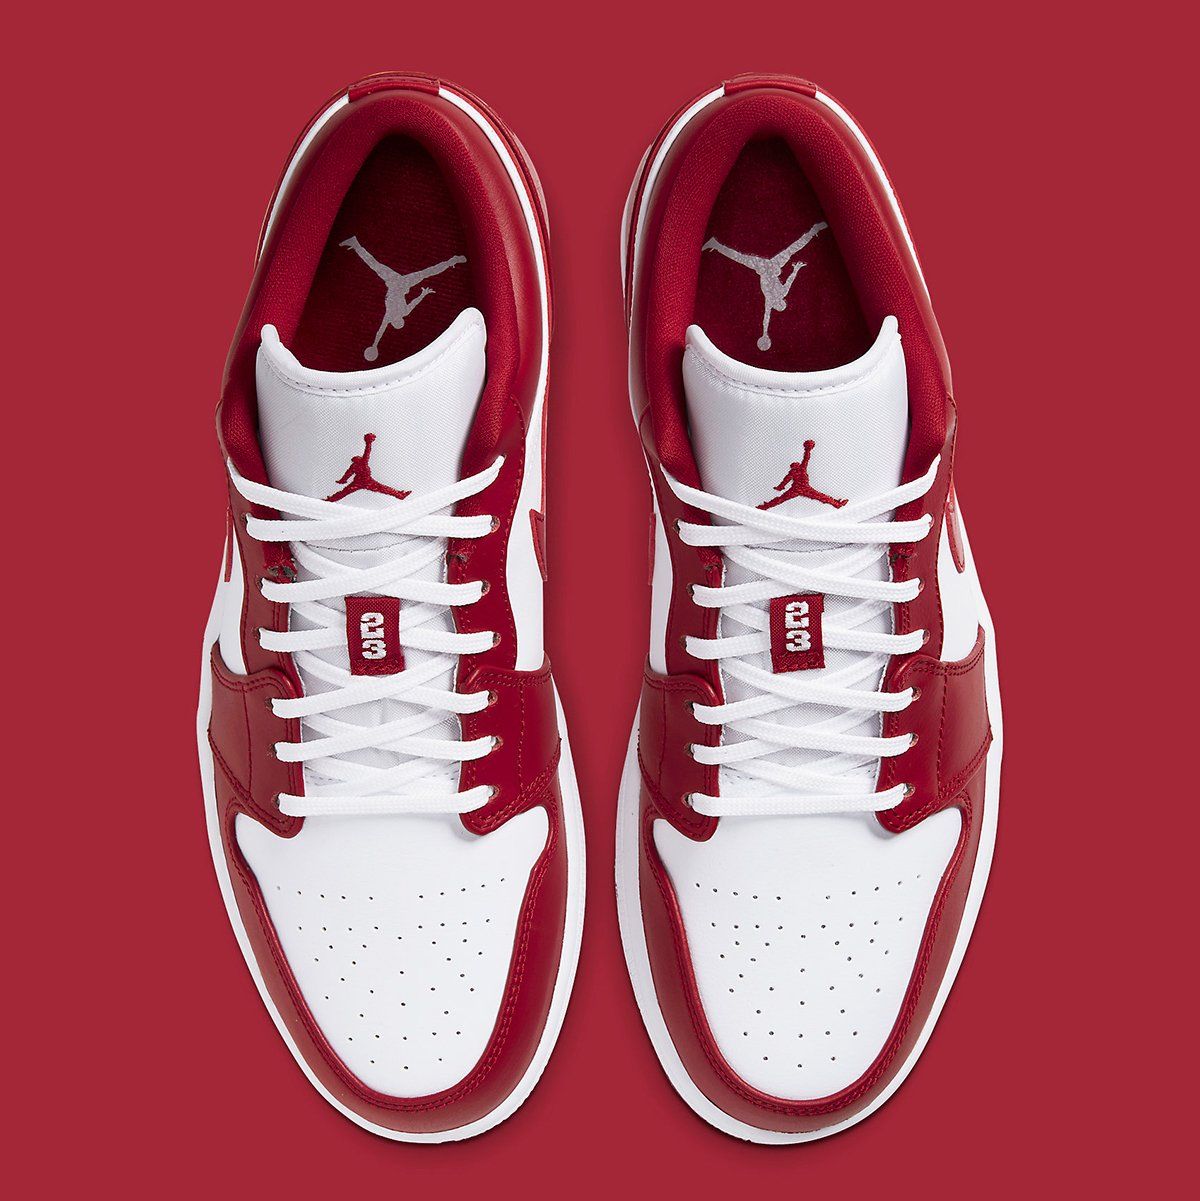 red and white low top jordans